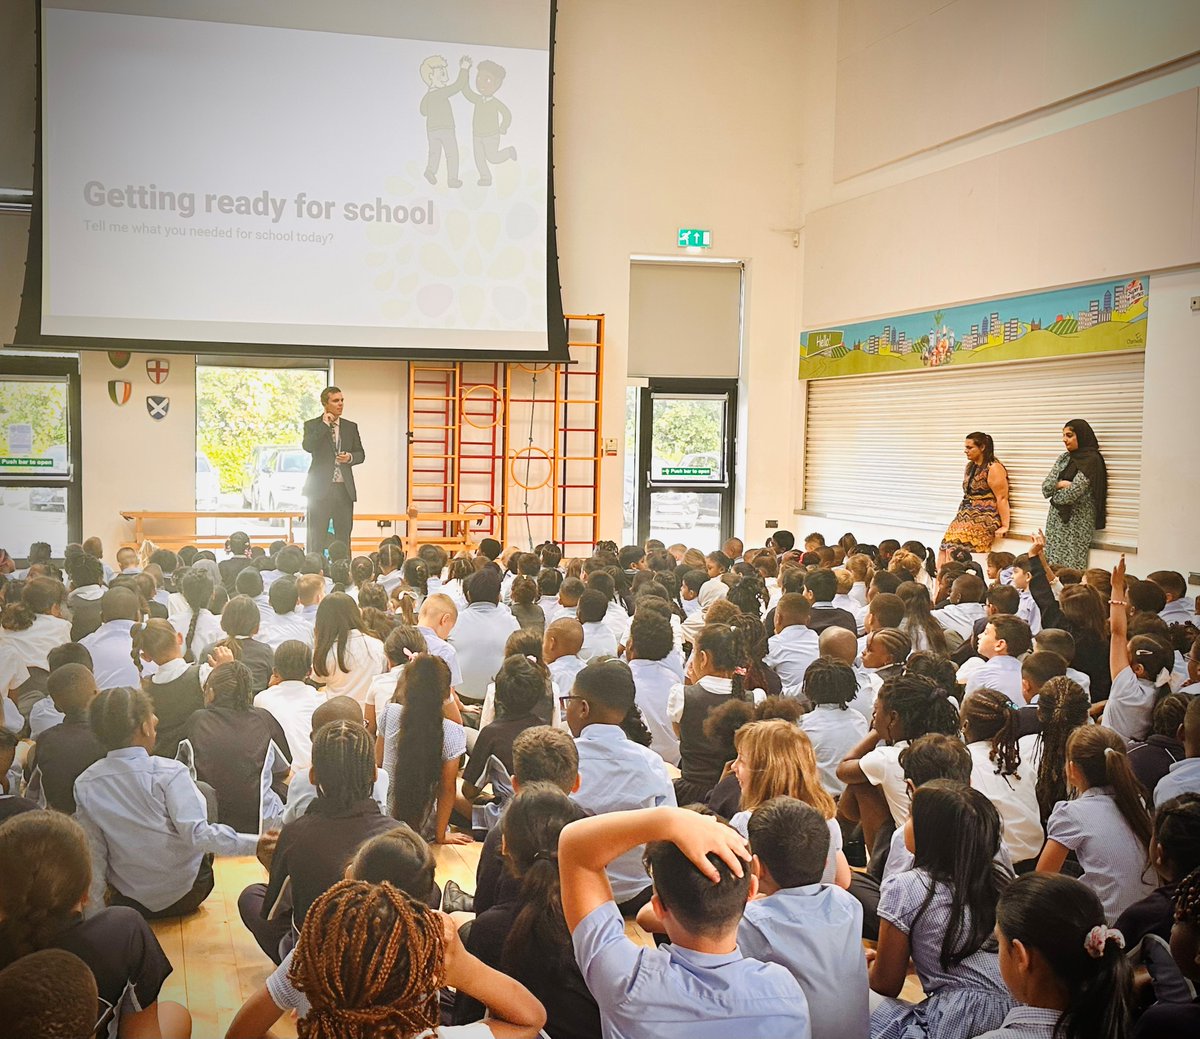 We had a brilliant start to our day this morning with a whole school assembly! We spoke about our values, getting ready for school, what it means to be a good friend and lots more!